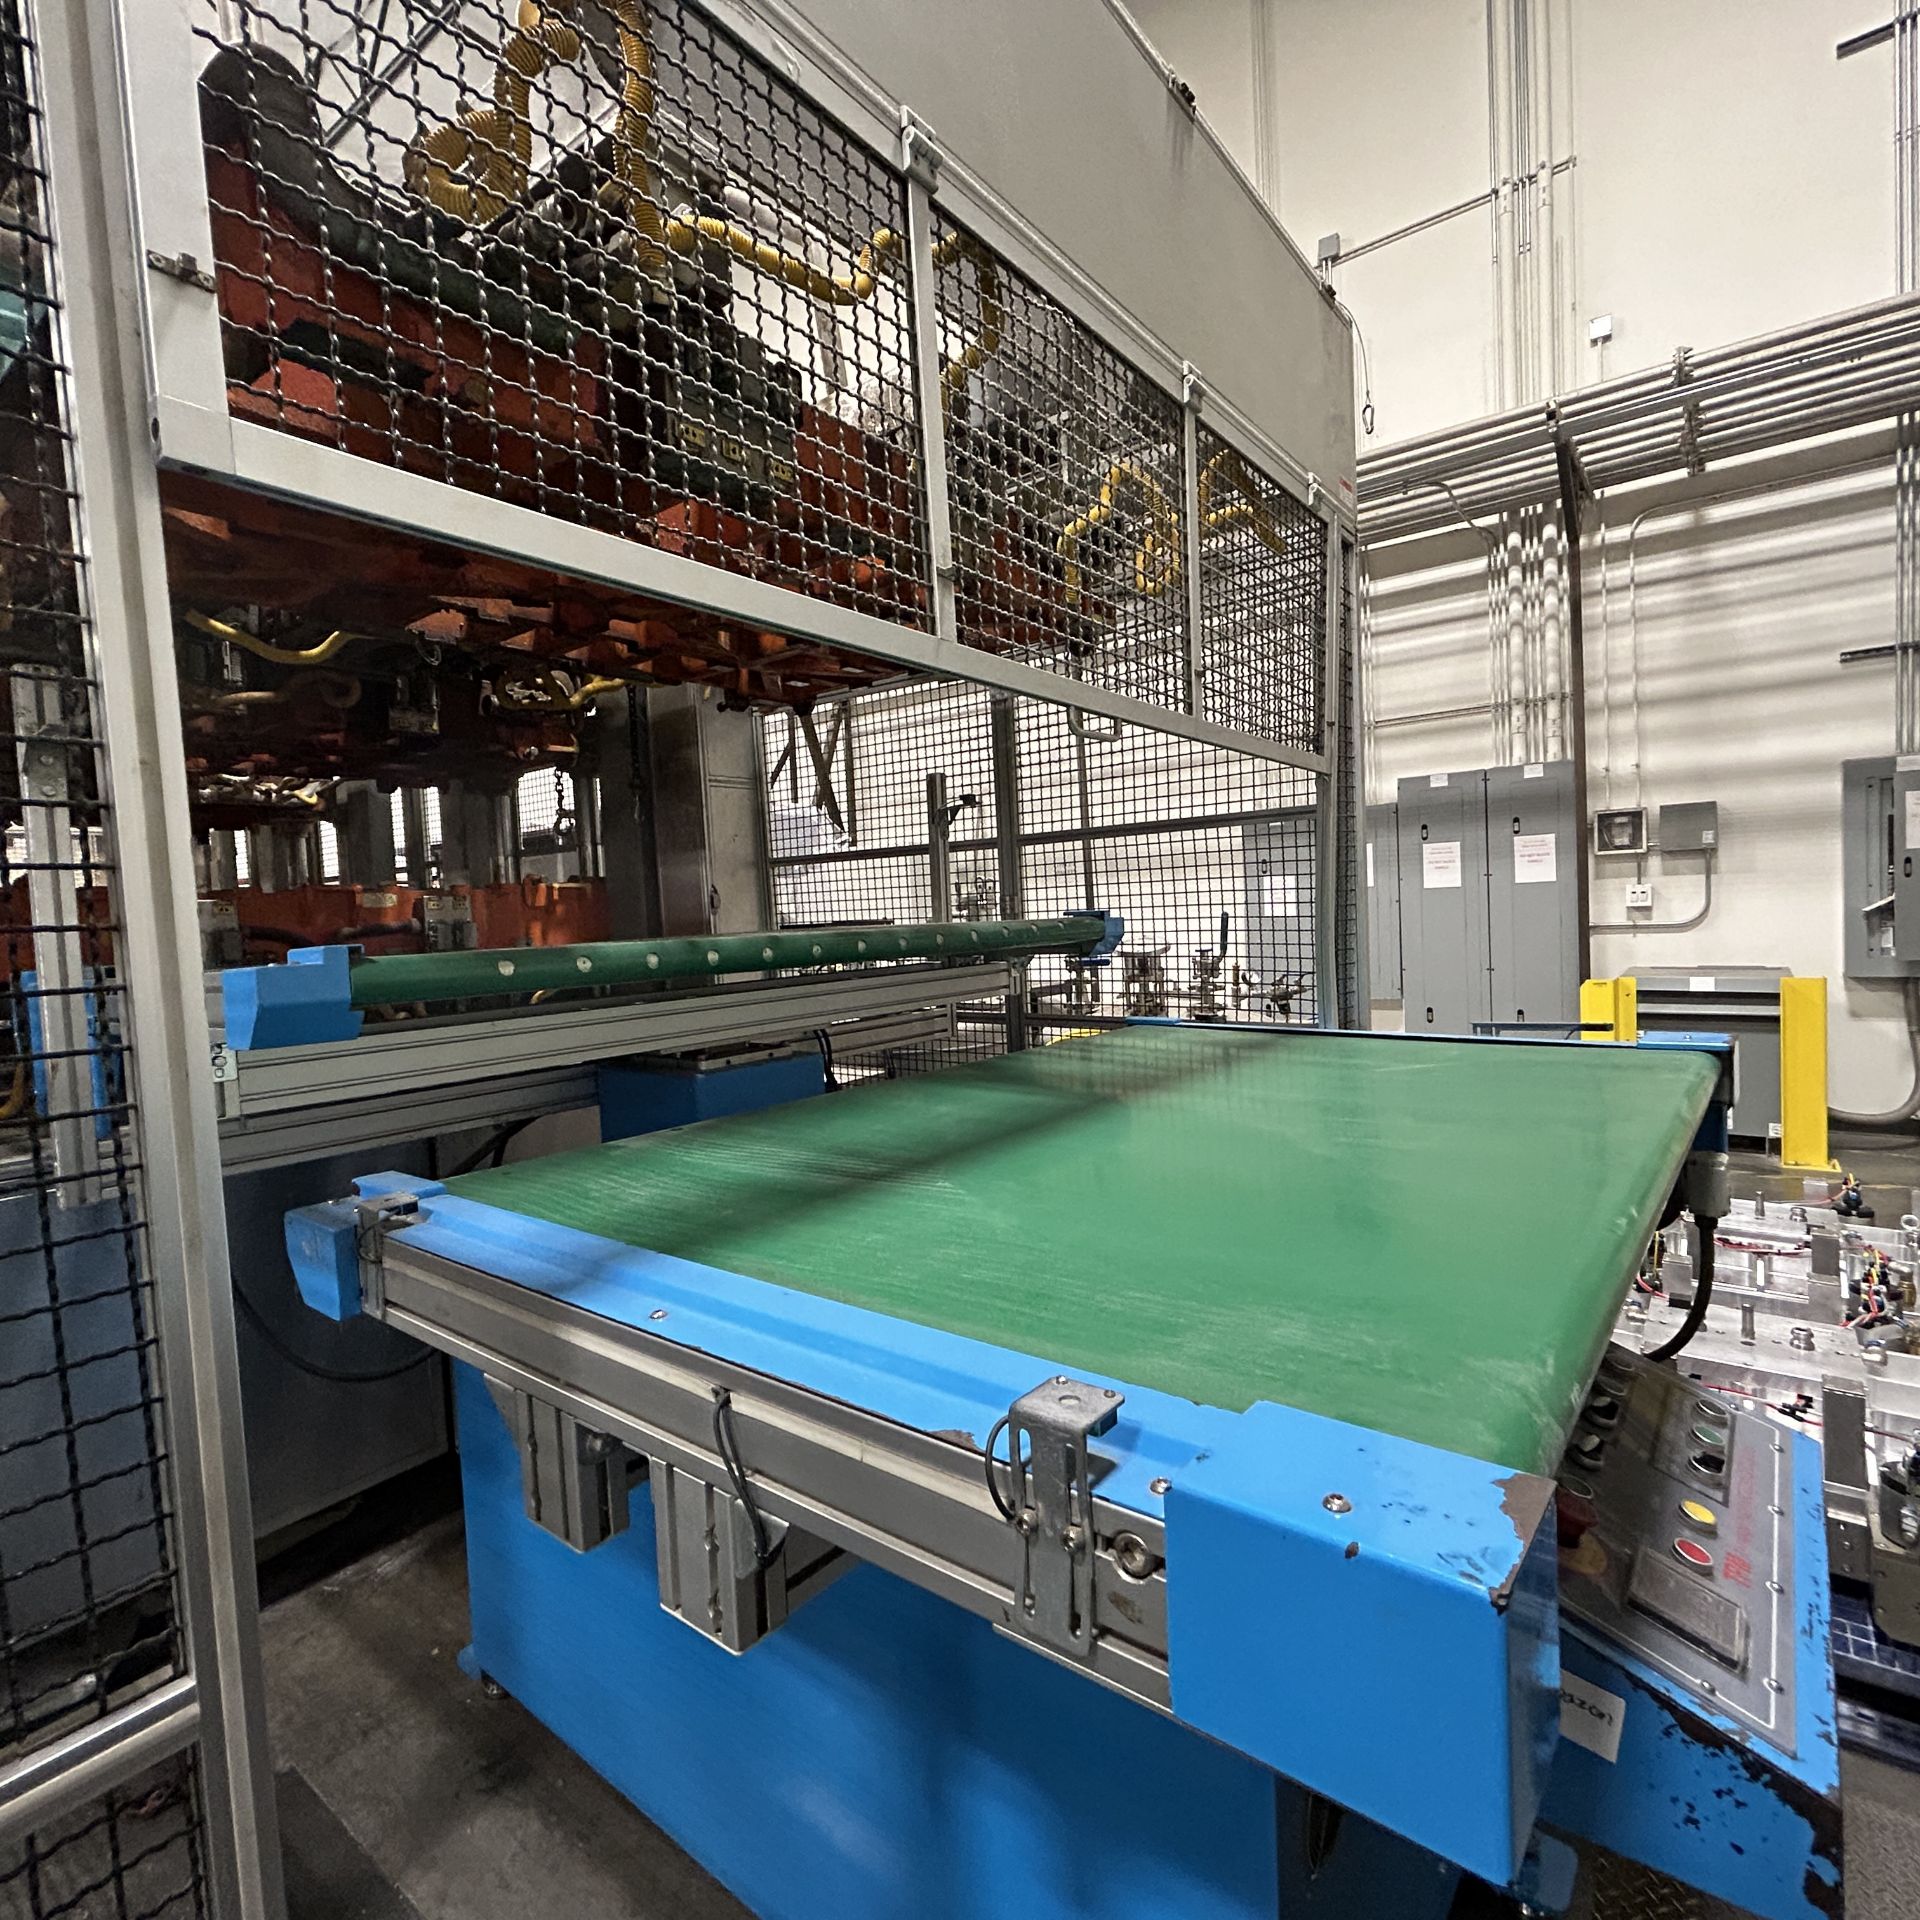 TPM-1500 3-Stage Pulp Thermoforming Machine Equipped With (1) 2018 TPM-AS-1500 2-Stage Auto Stacker - Image 4 of 39